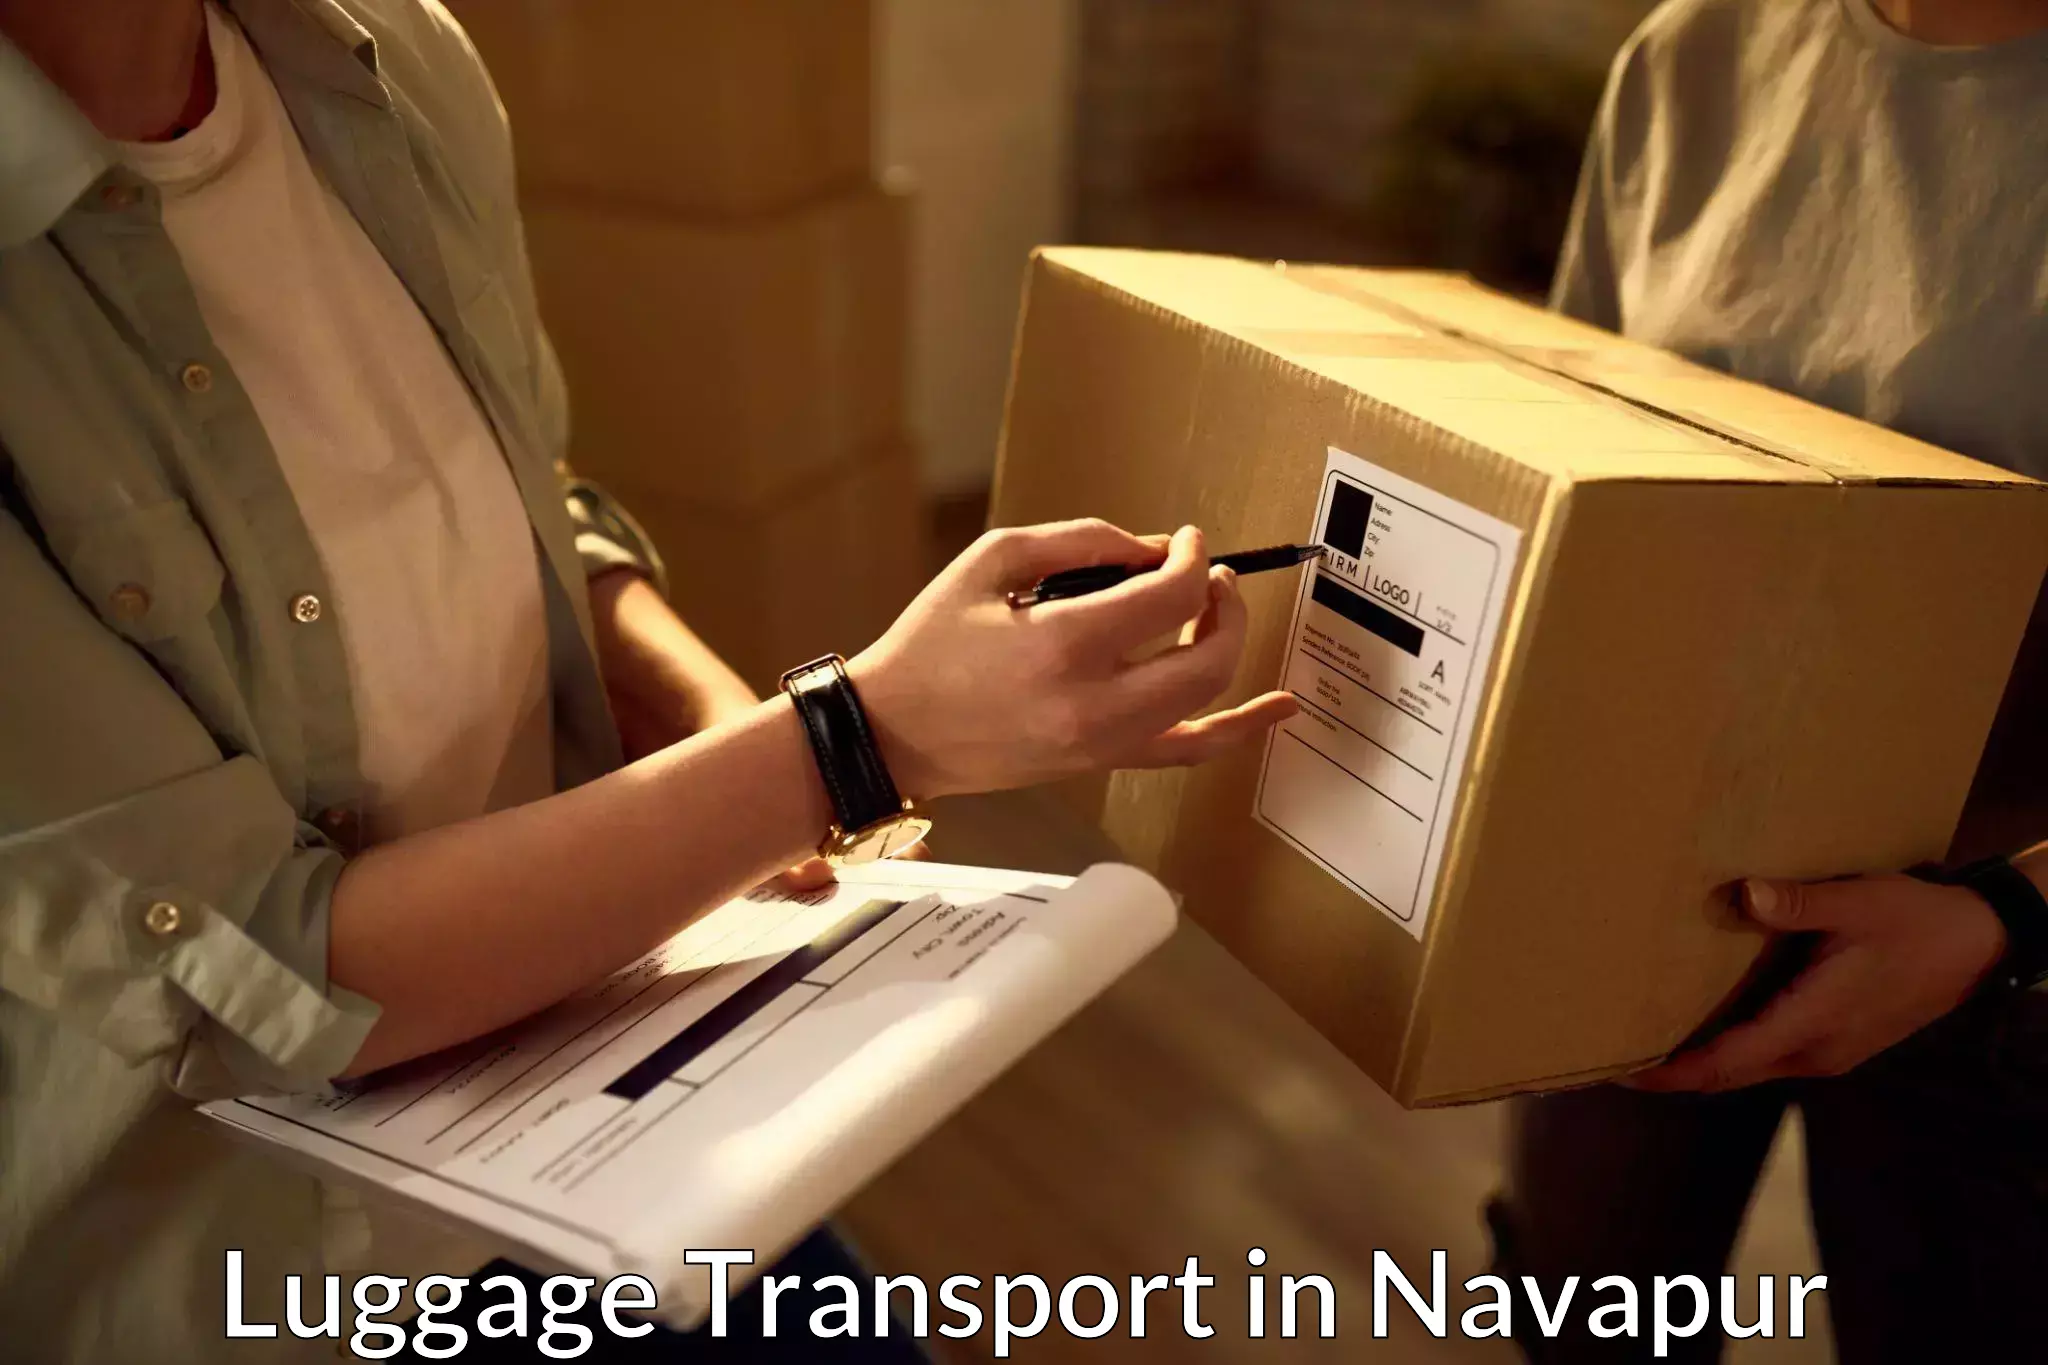 Baggage transport services in Navapur